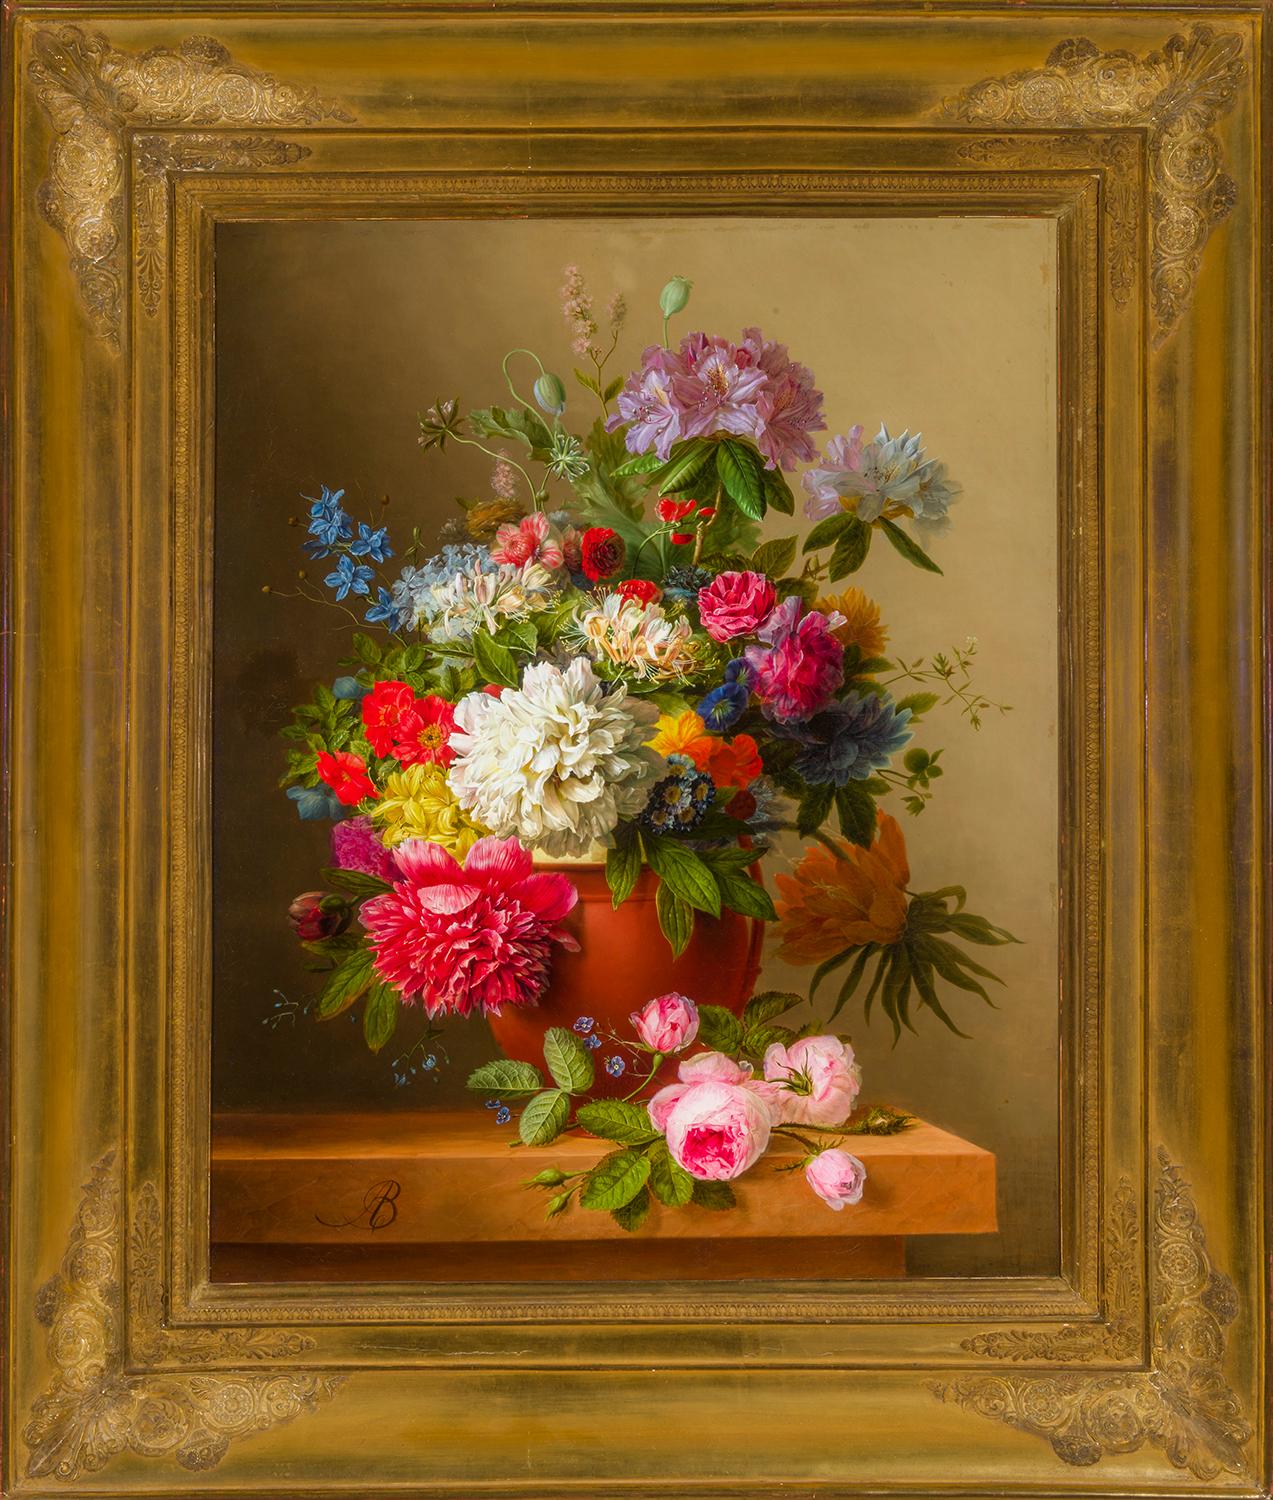 Arnoldus Bloemers  Still-Life Painting - Still Life of Peonies, Roses, Honeysuckle, Poppies, and other Flowers